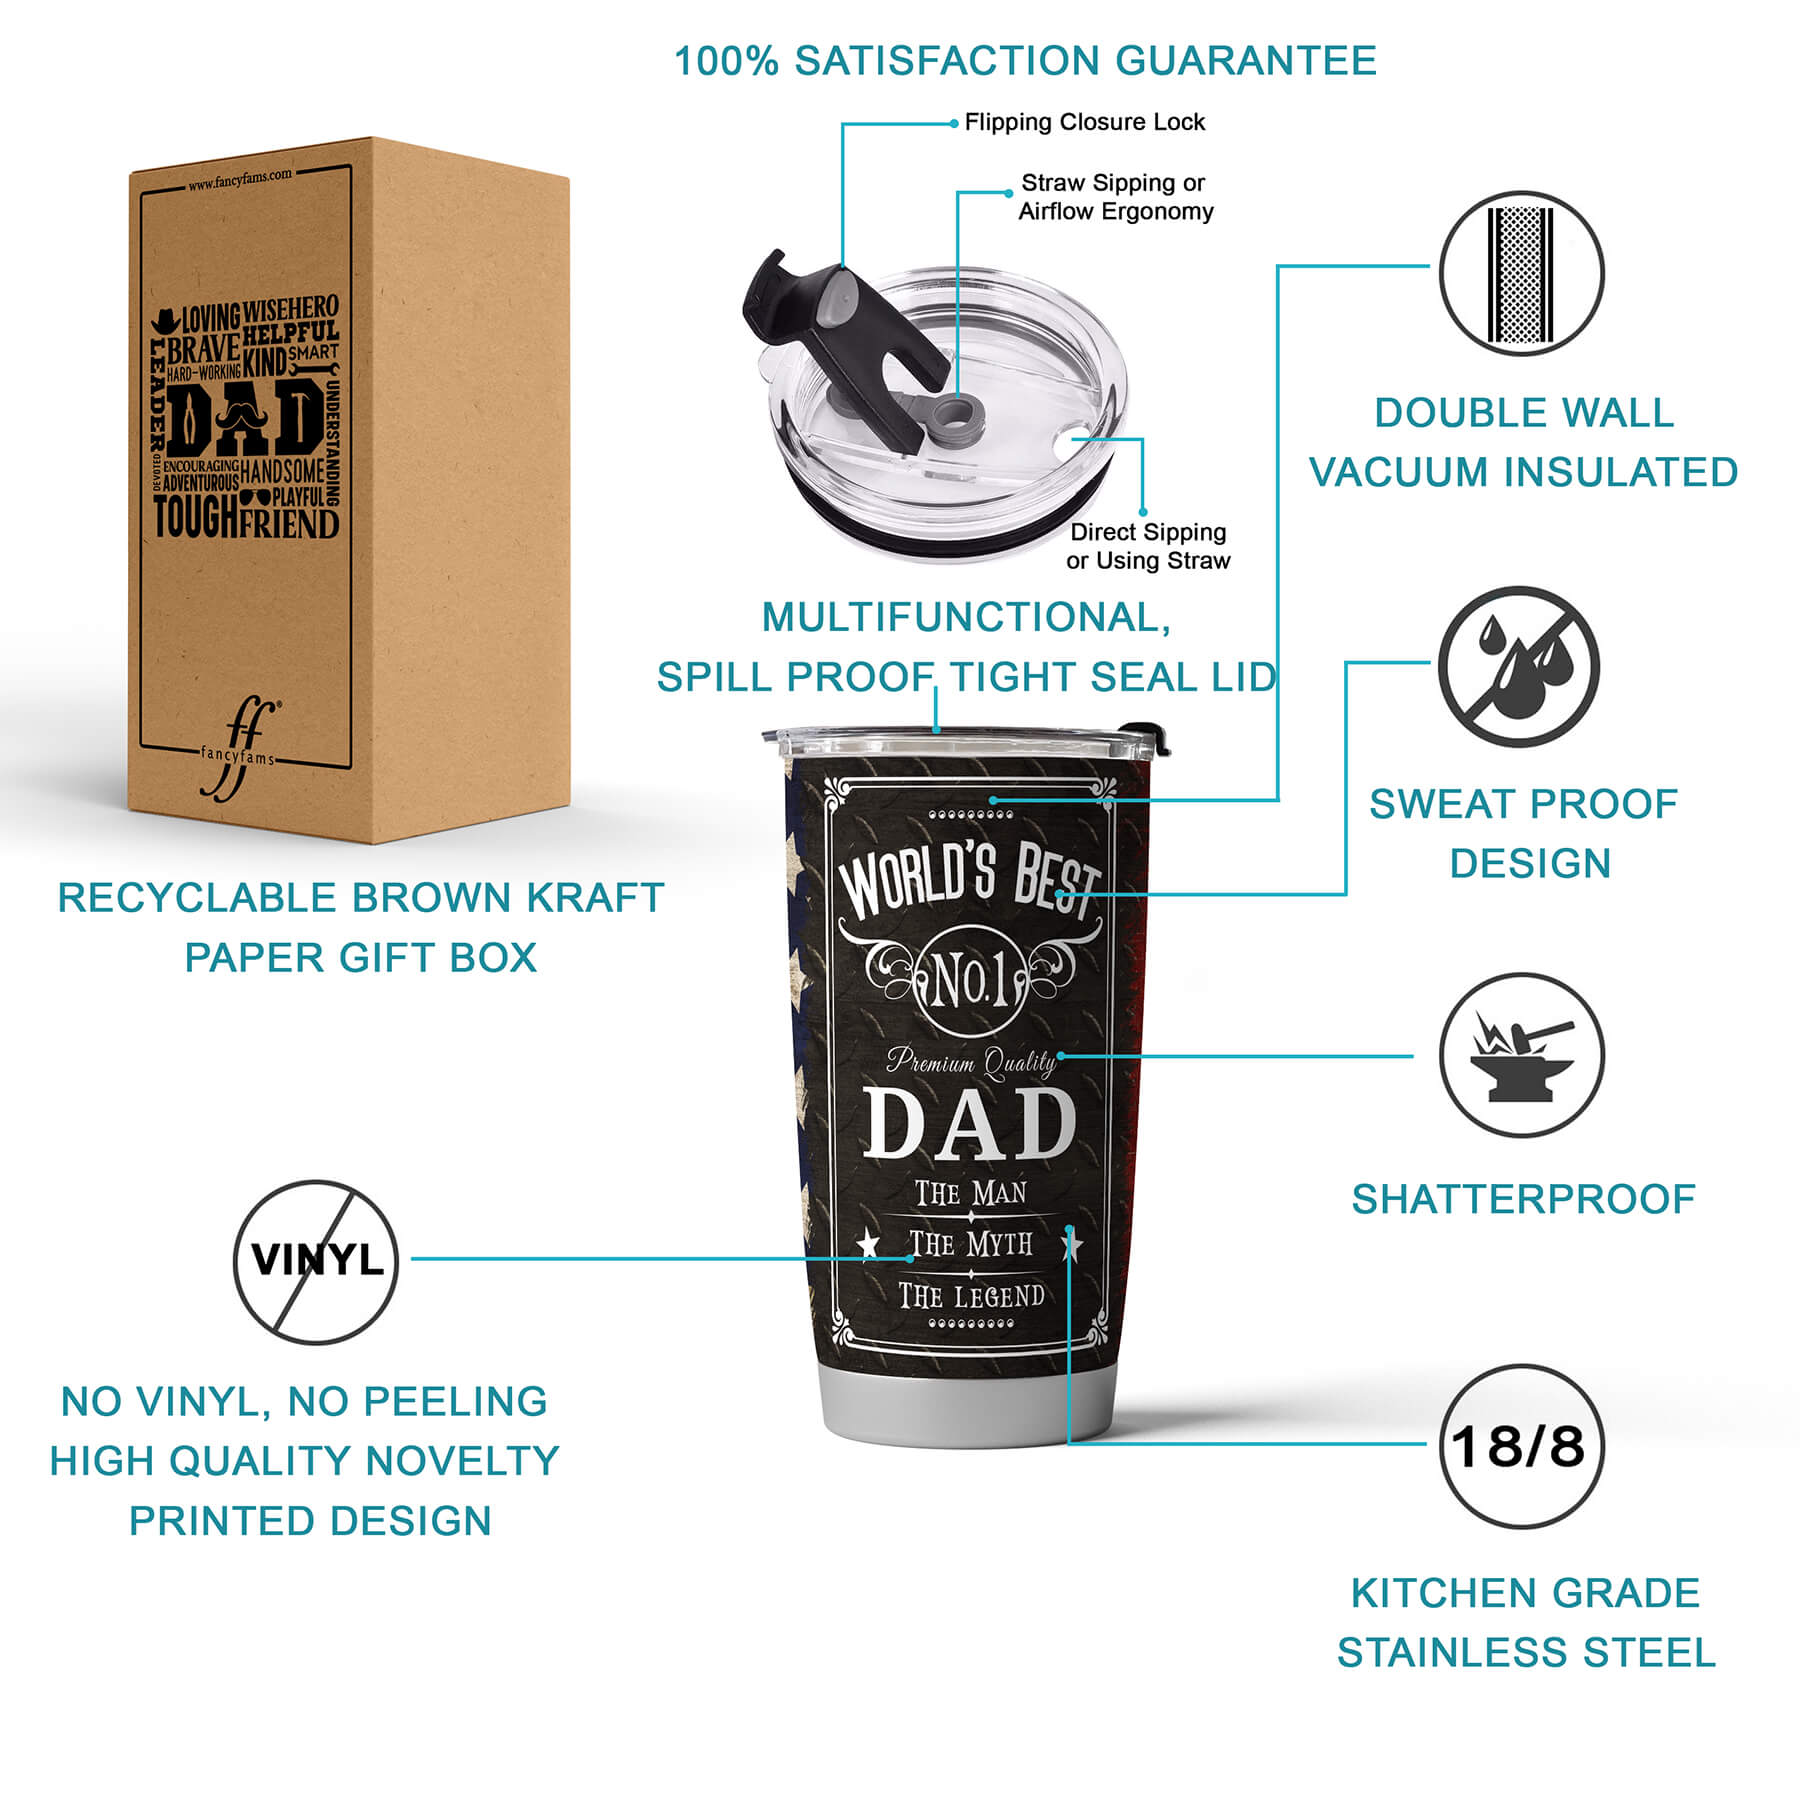 Gifts for Dad - 20 oz World’s Best No.1 Dad stainless steel tumbler - fancyfams